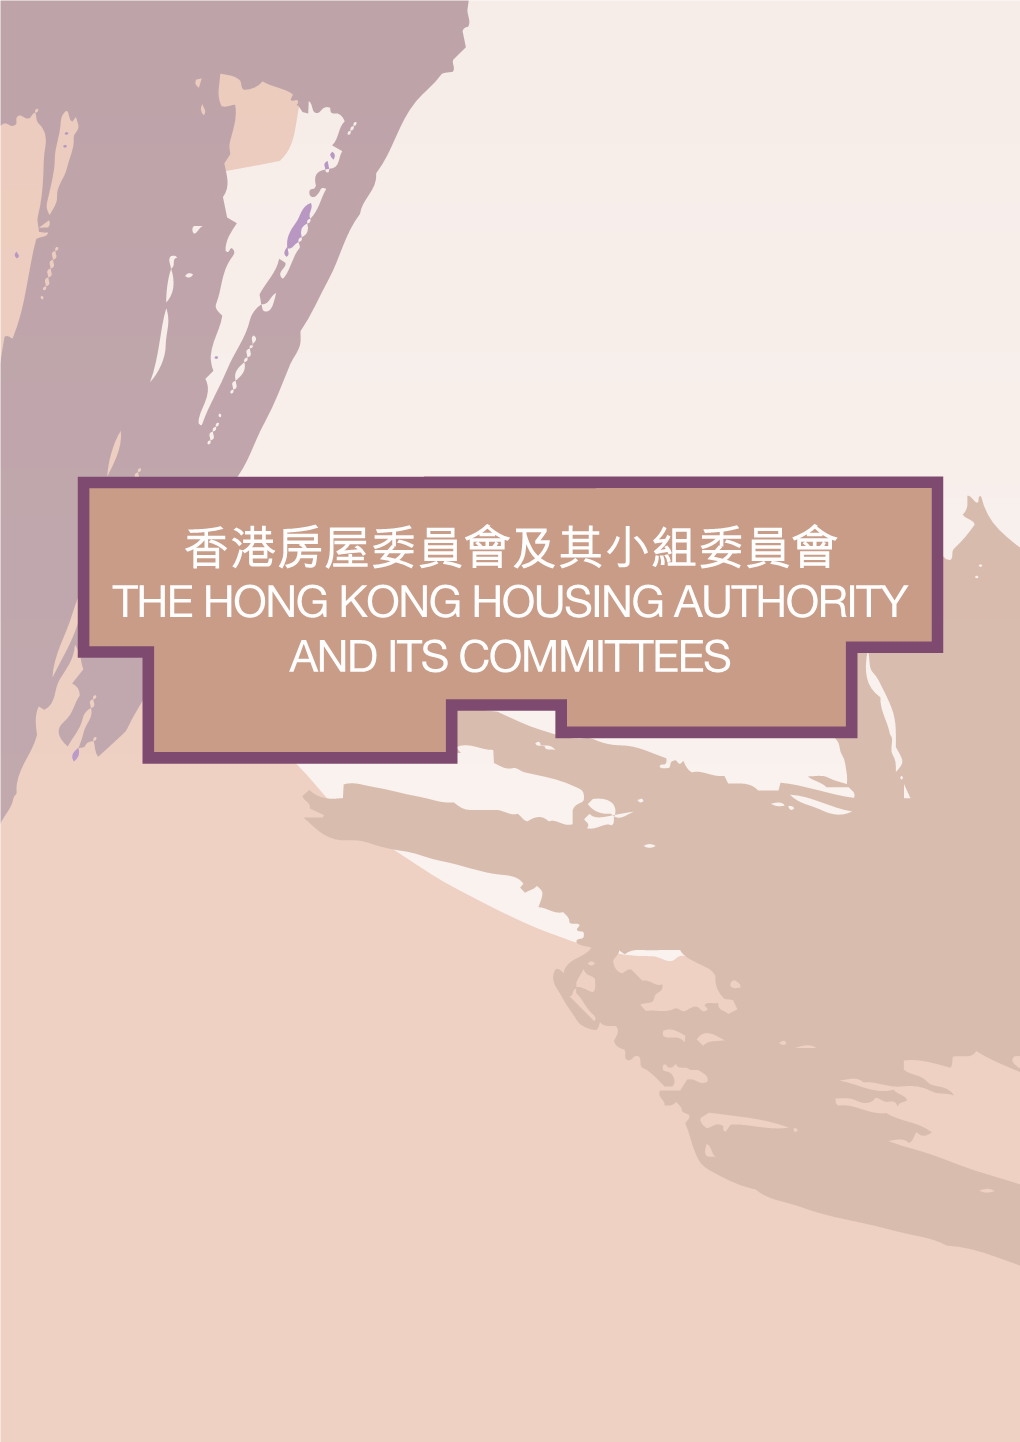 THE HONG KONG HOUSING AUTHORITY and ITS COMMITTEES 香港房屋委員會及其小組委員會 83 the Hong Kong Housing Authority and Its Committees